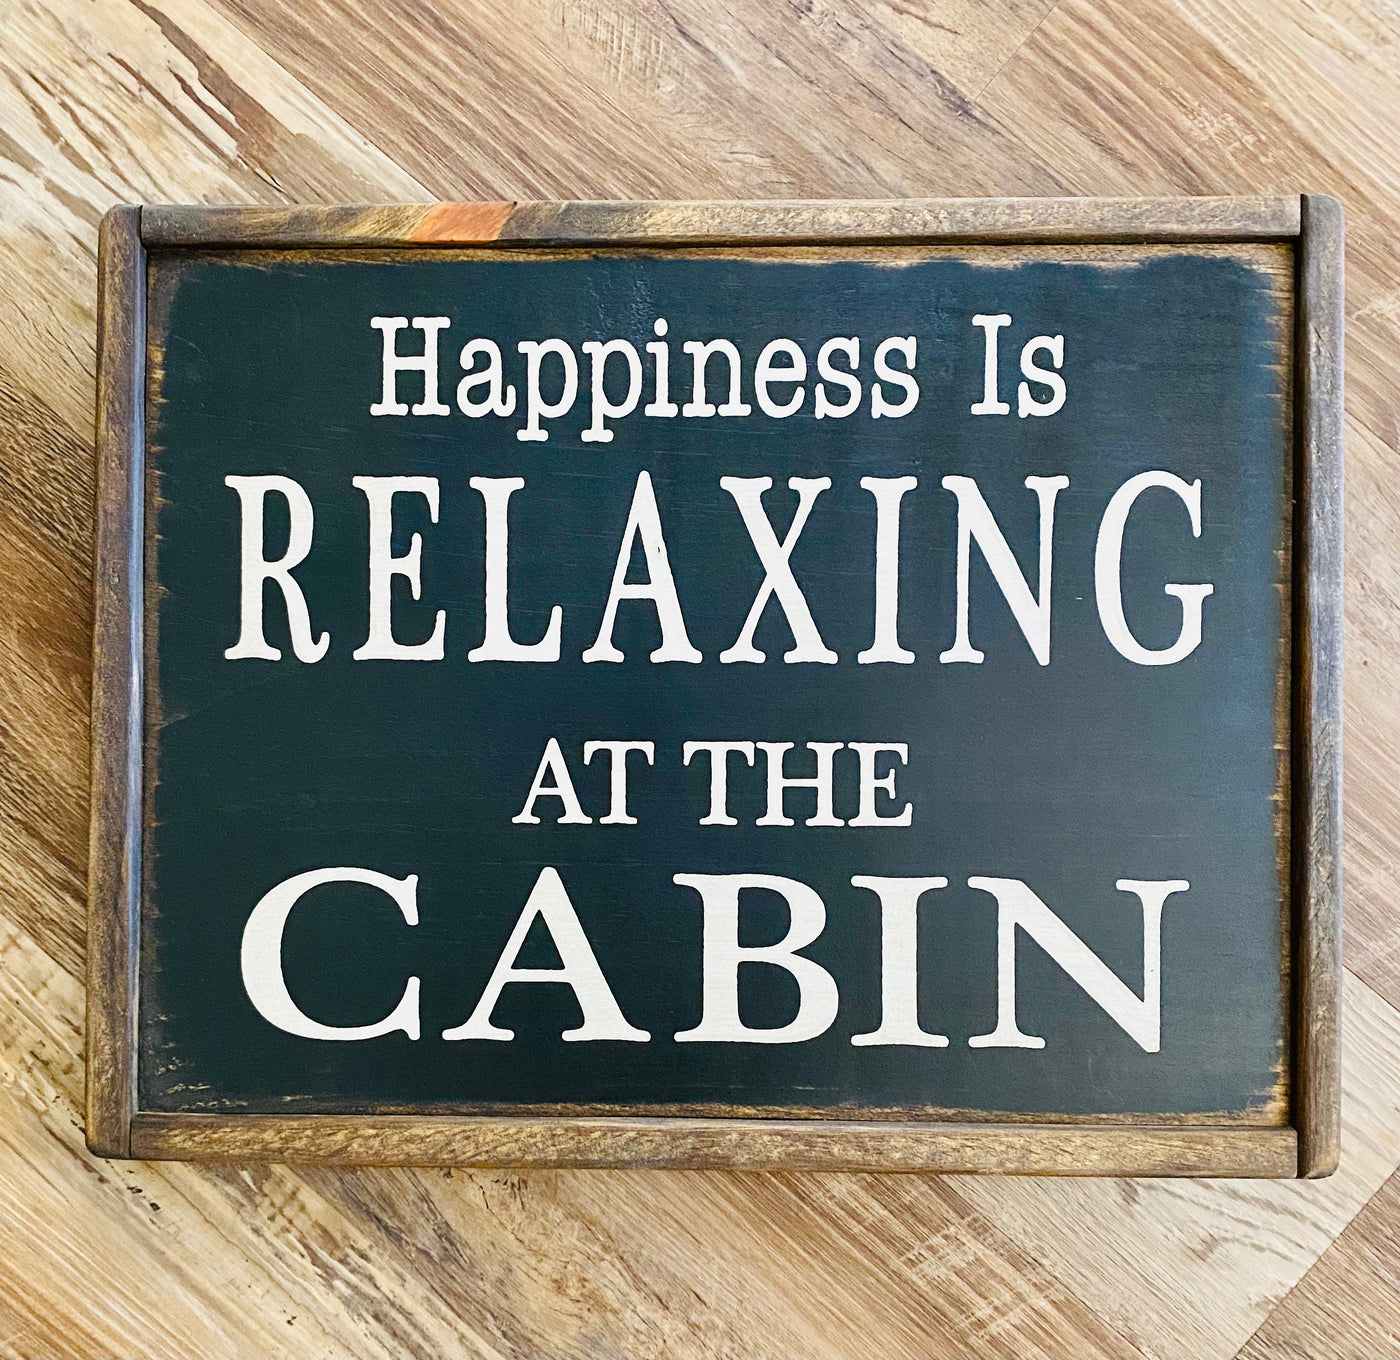 Happiness Is Relaxing at The Cabin